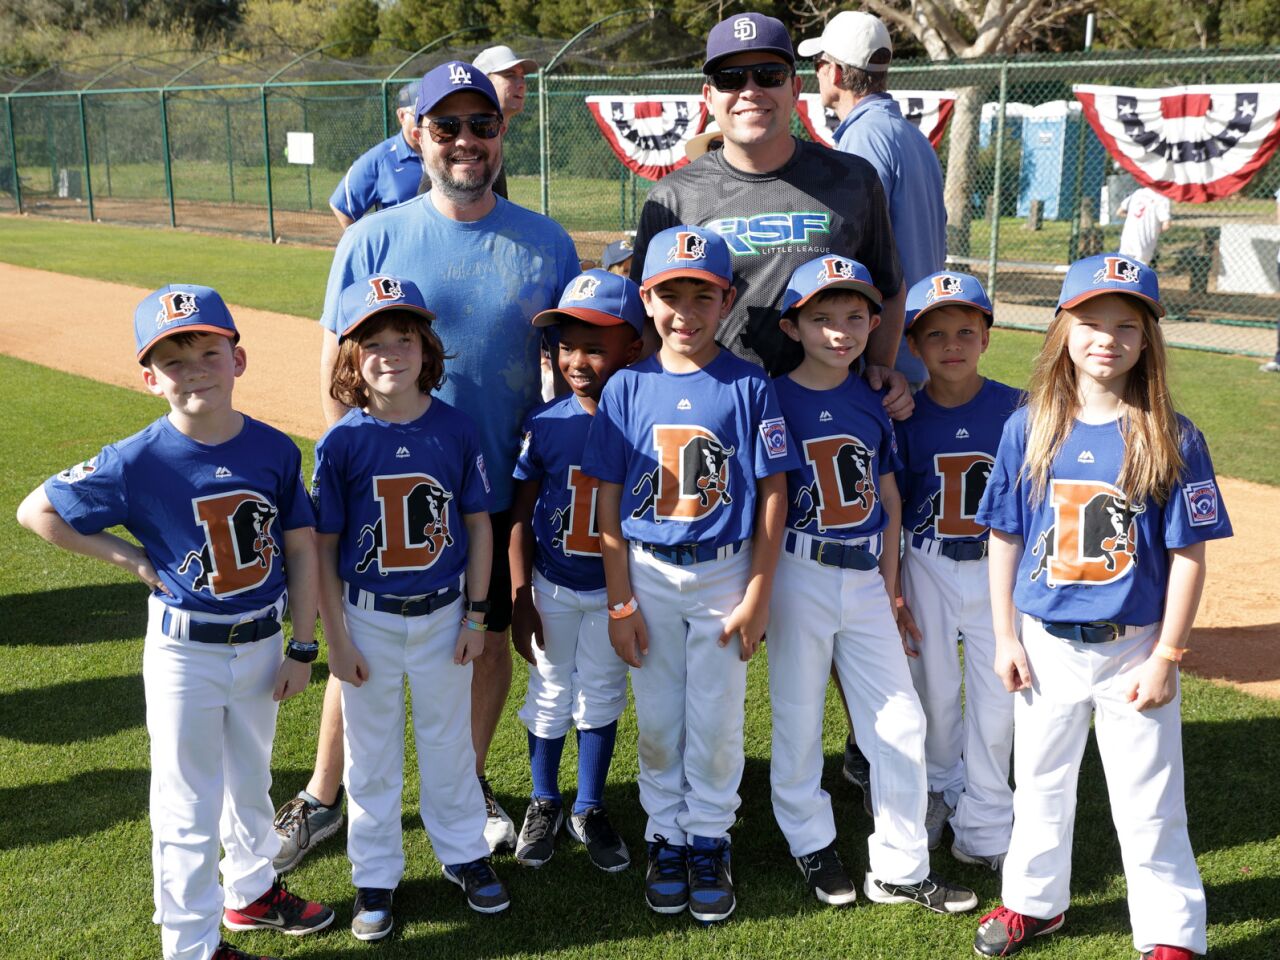 Division A Bulls at the RSF Little League Opening Day